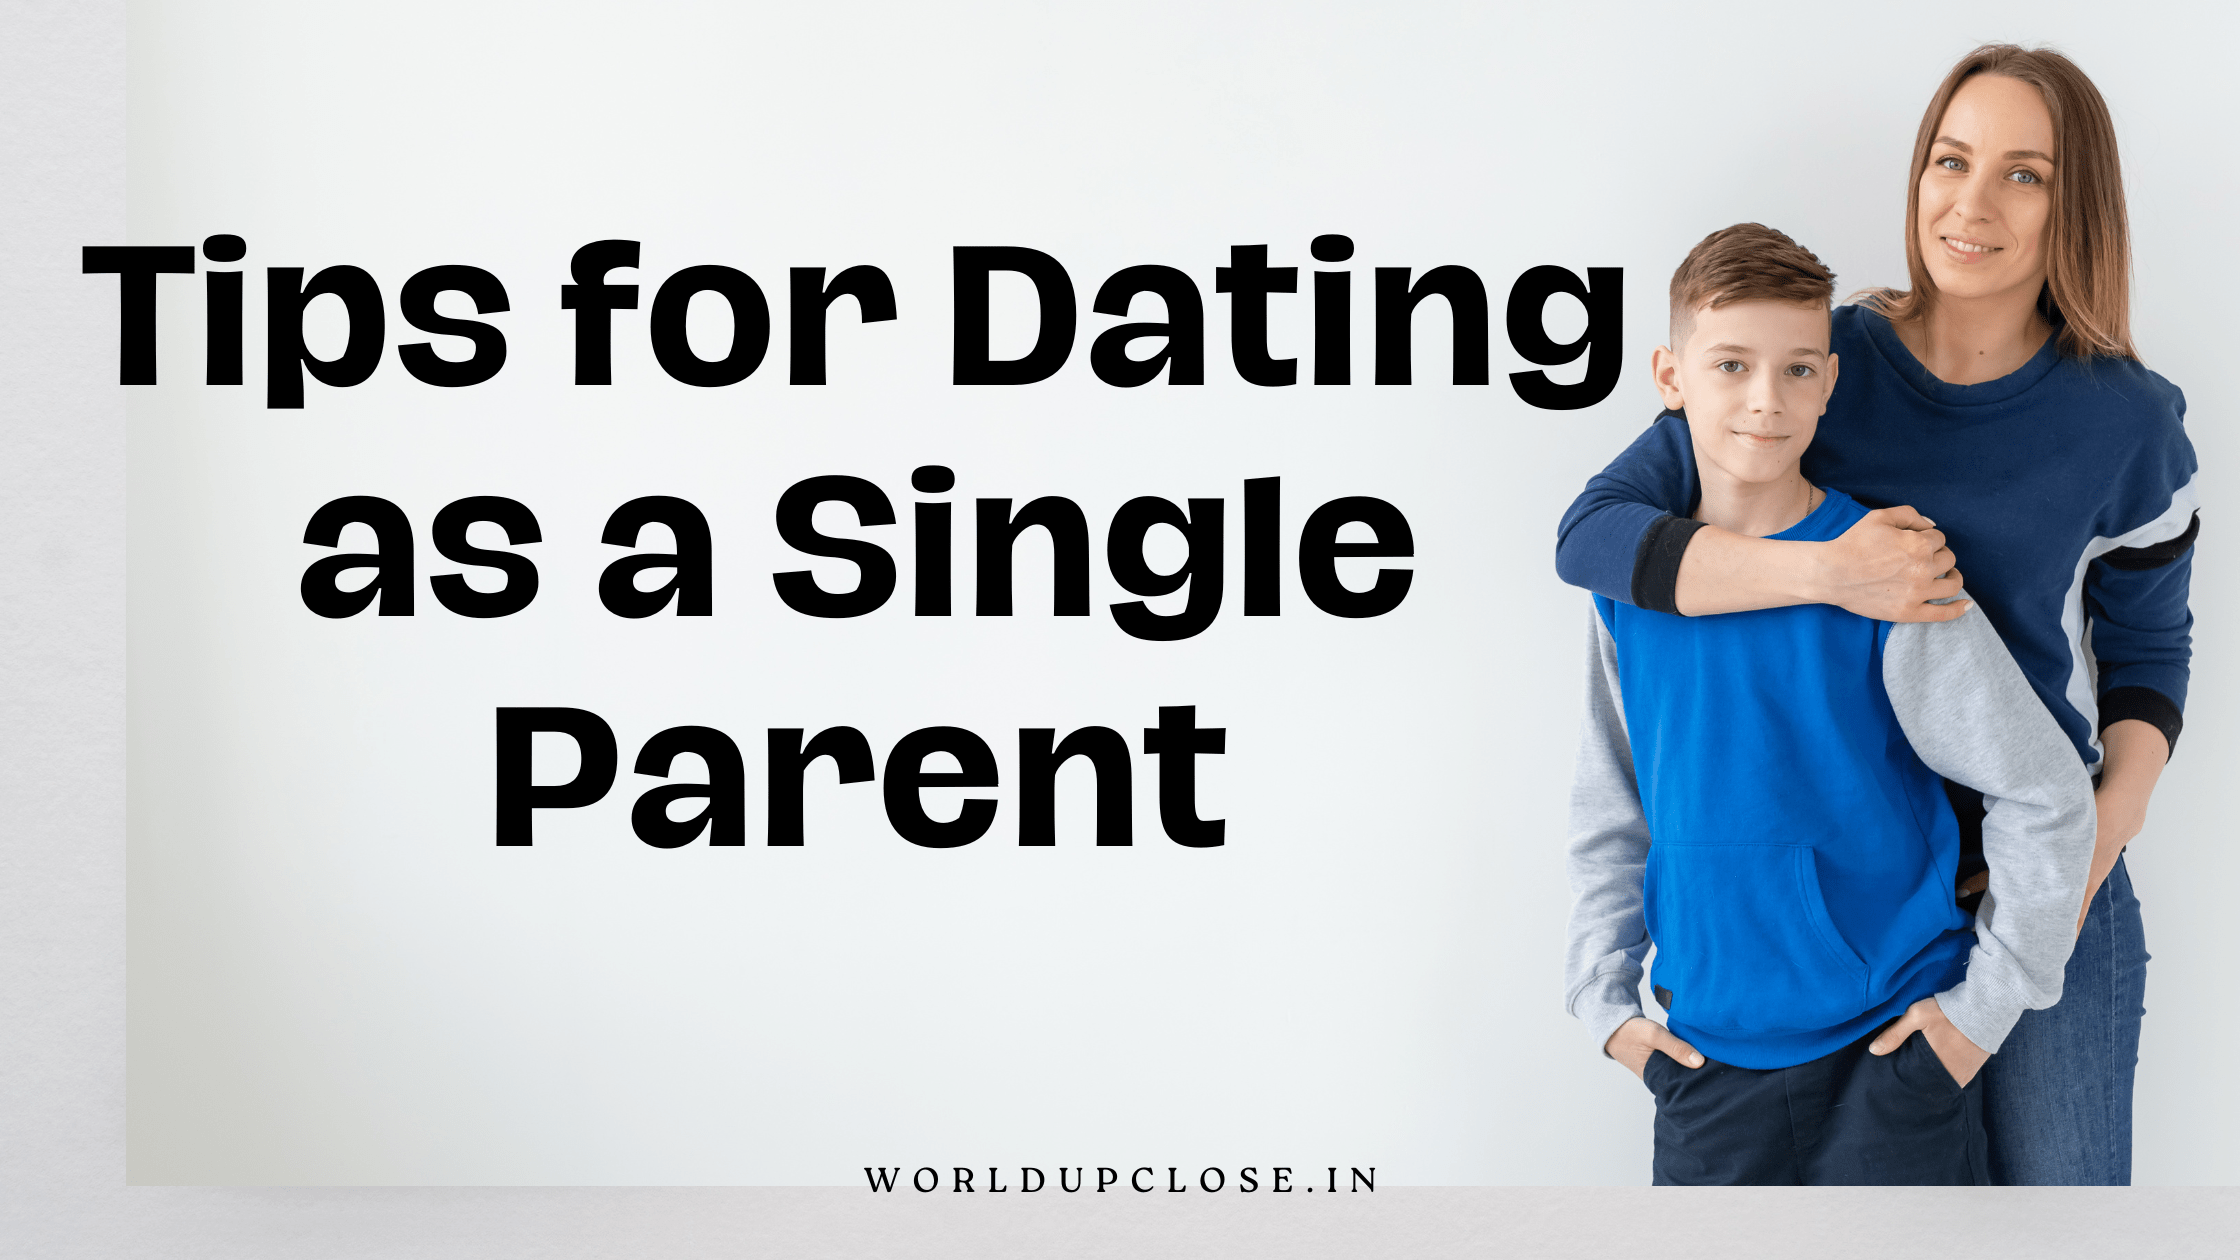 25 Helpful Tips for Dating as a Single Parent 2